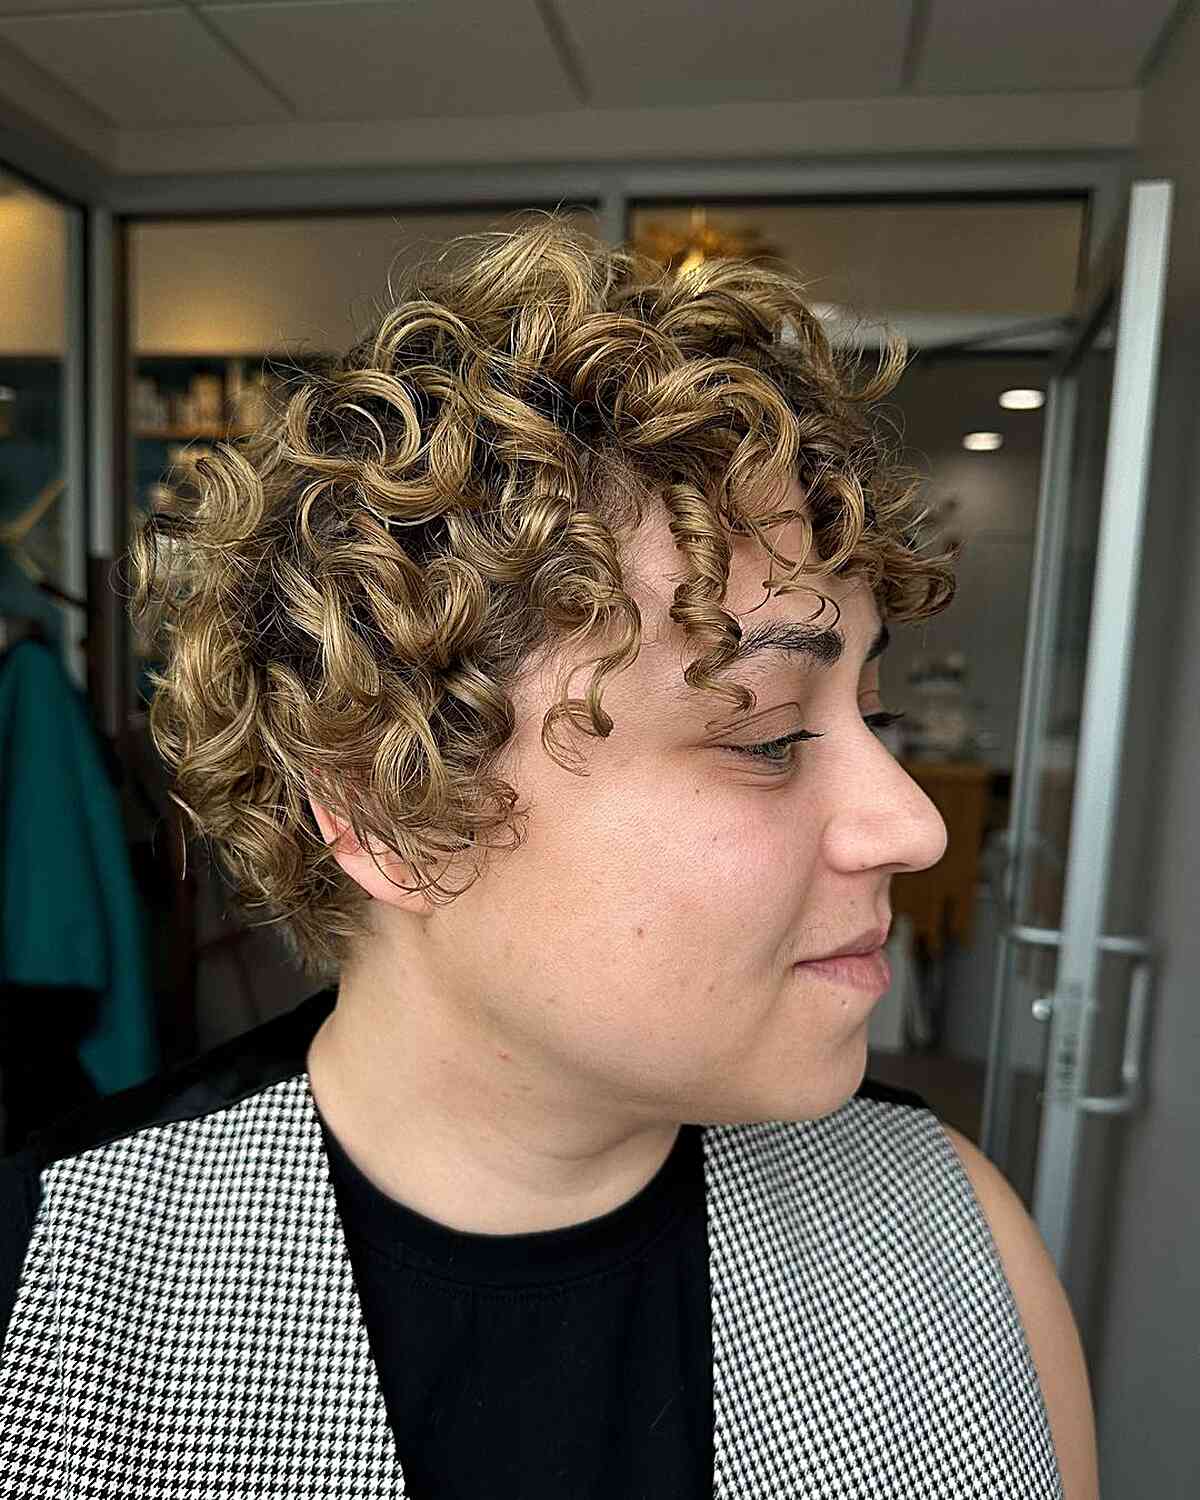 Ear-Length Curly Hair Blonde Balayage with Curly Fringe